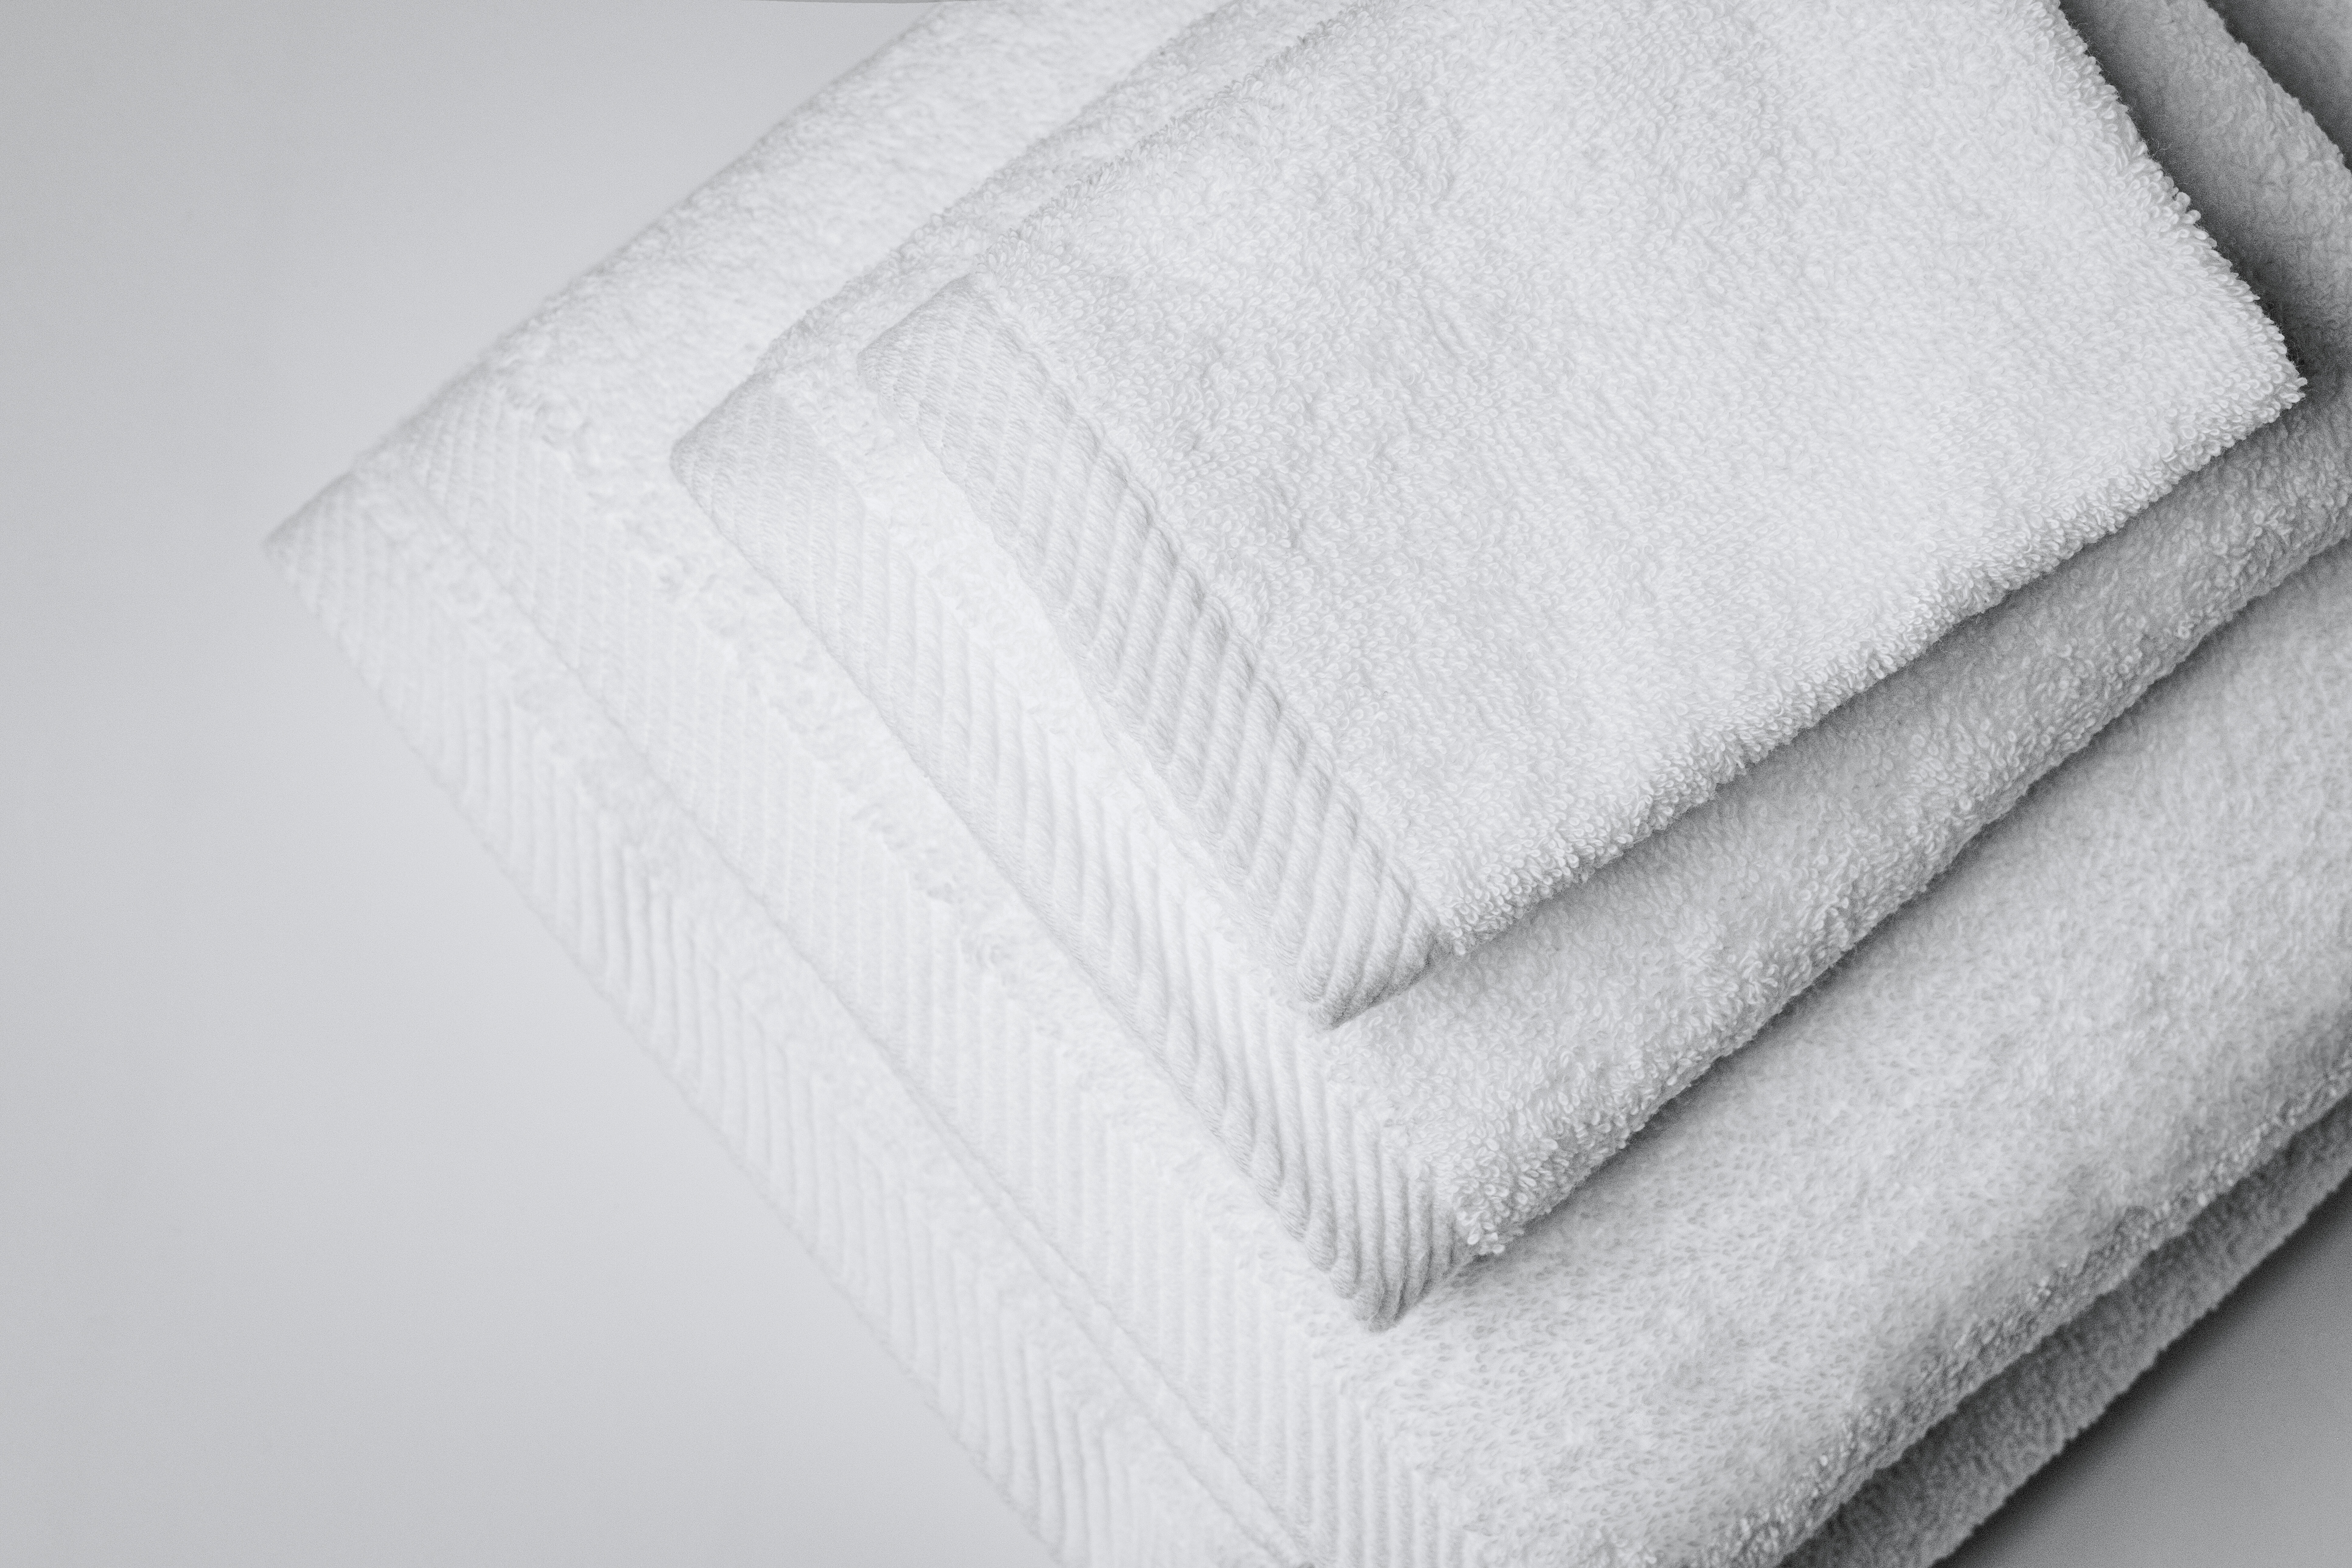 Premium pool towels from Poggesi's Basics Collection, combining style